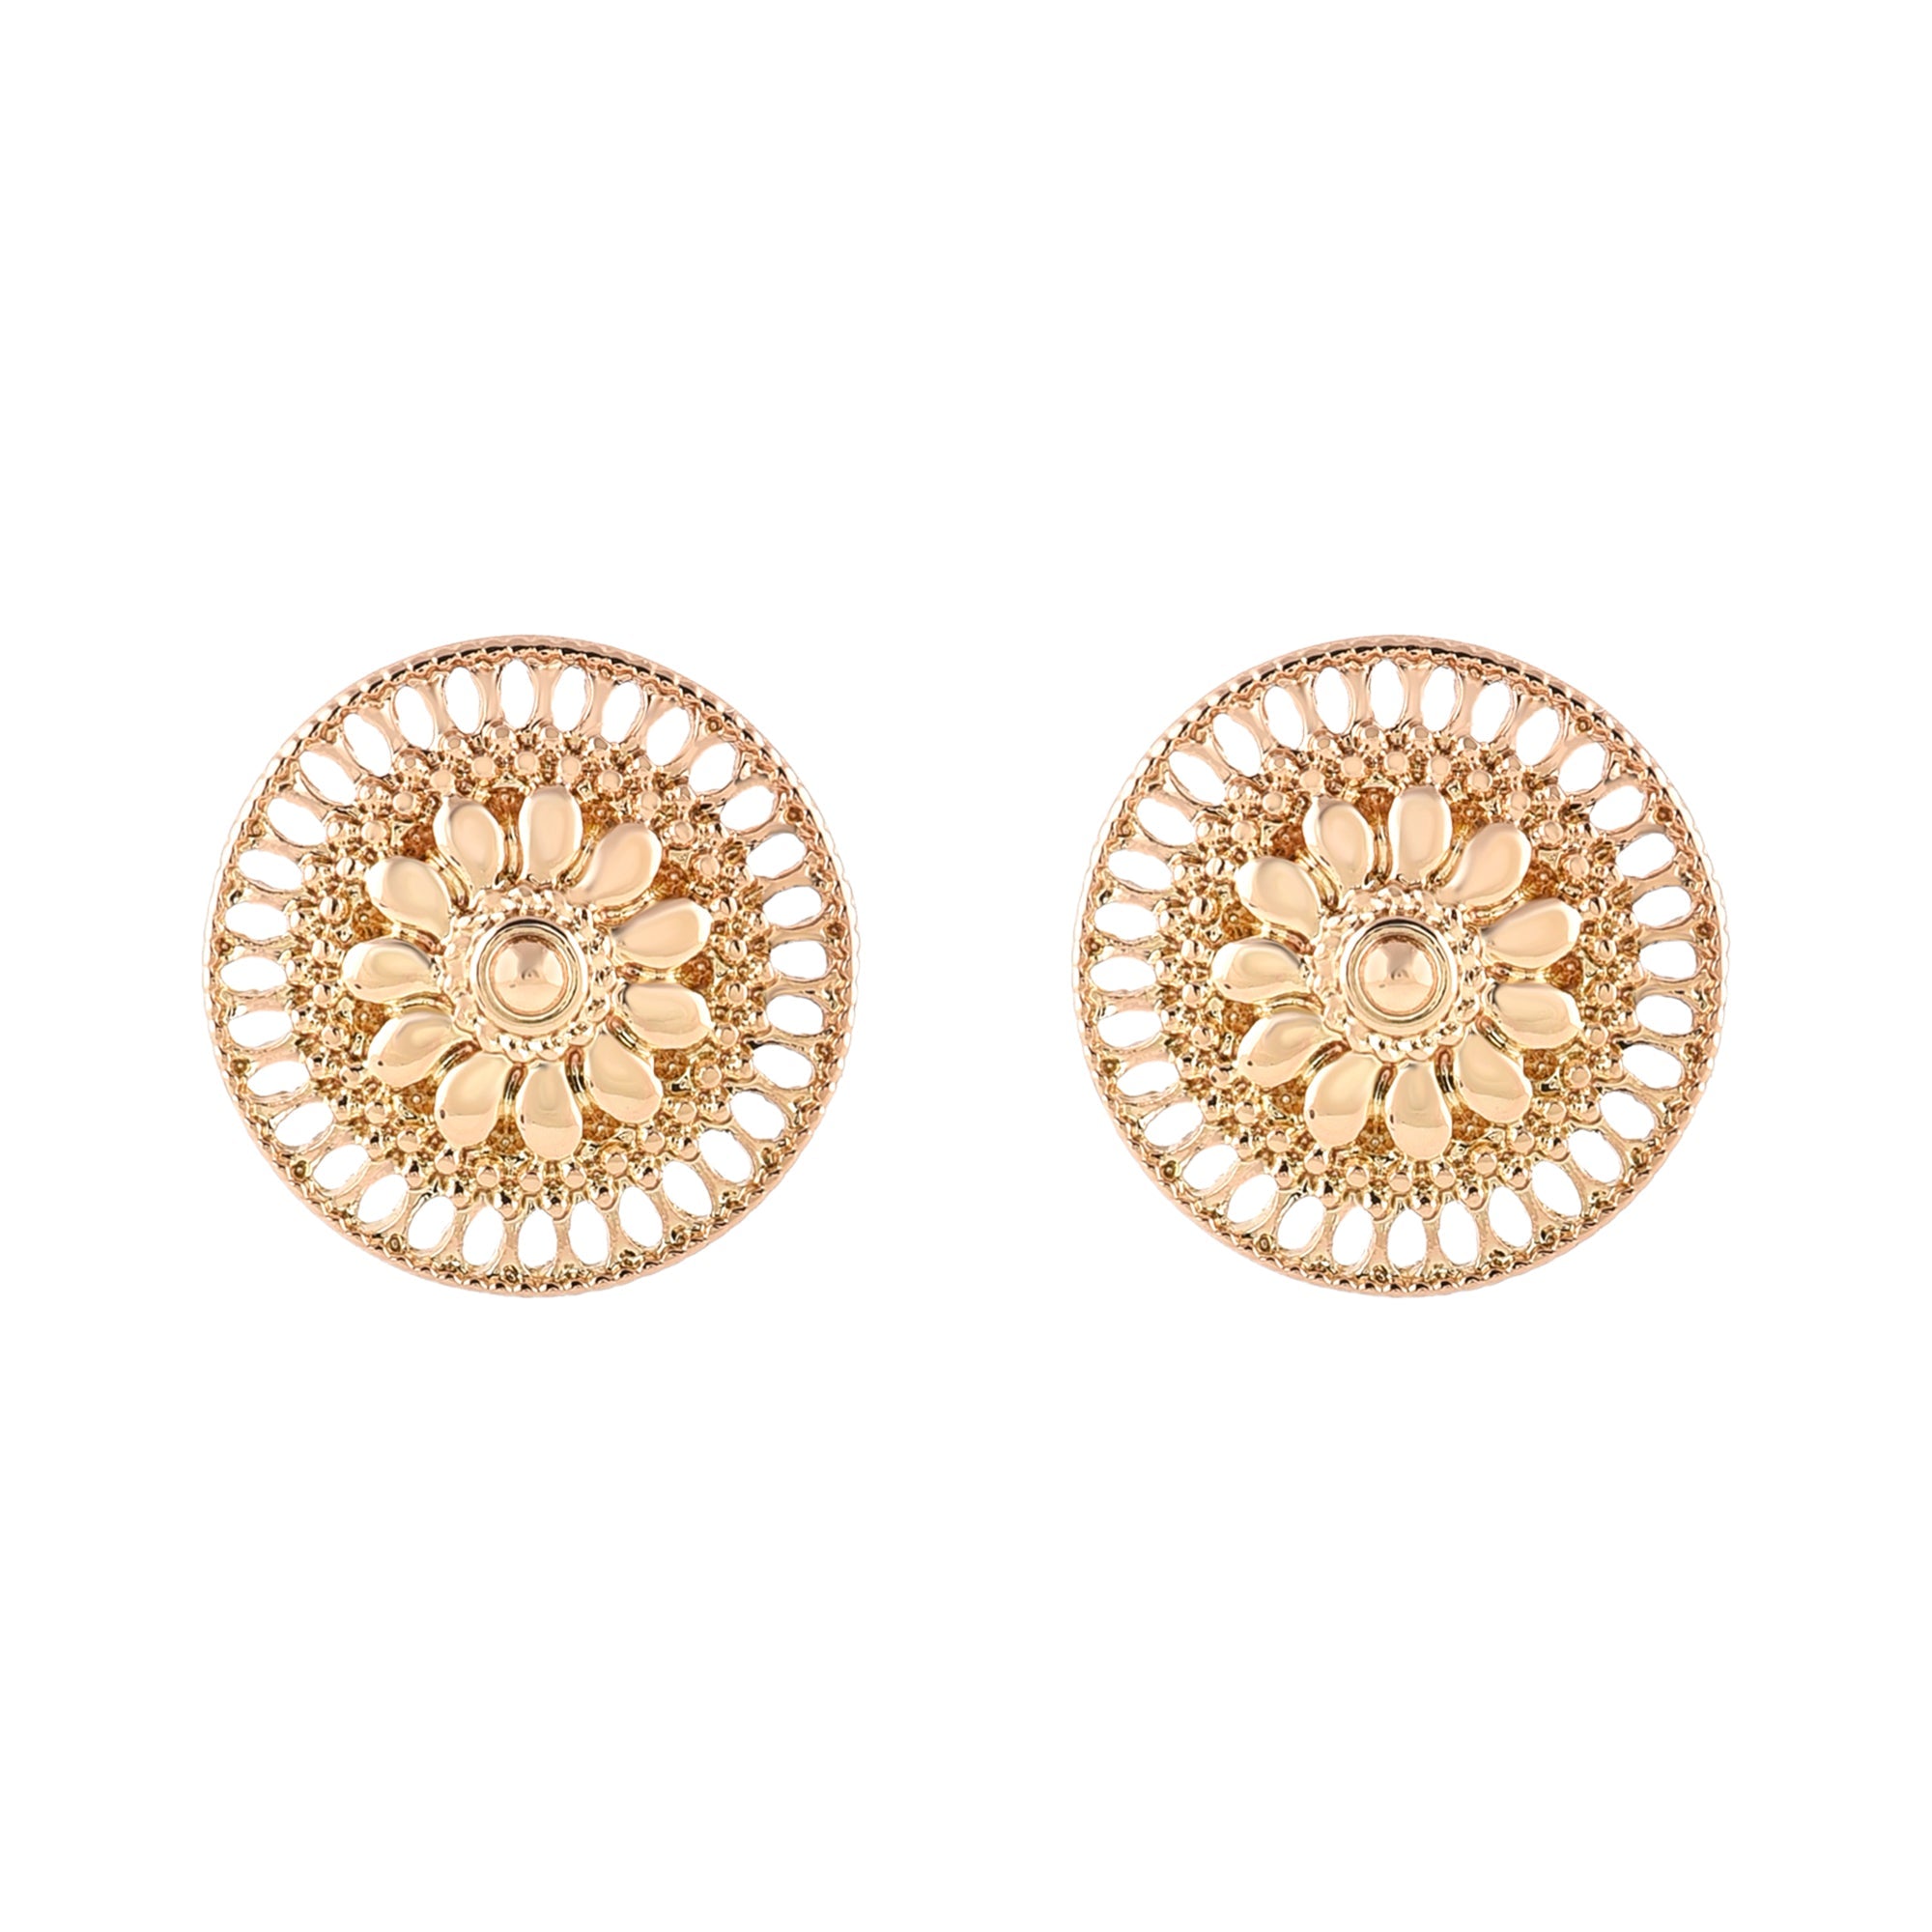 Discover more than 235 gold round stud earrings